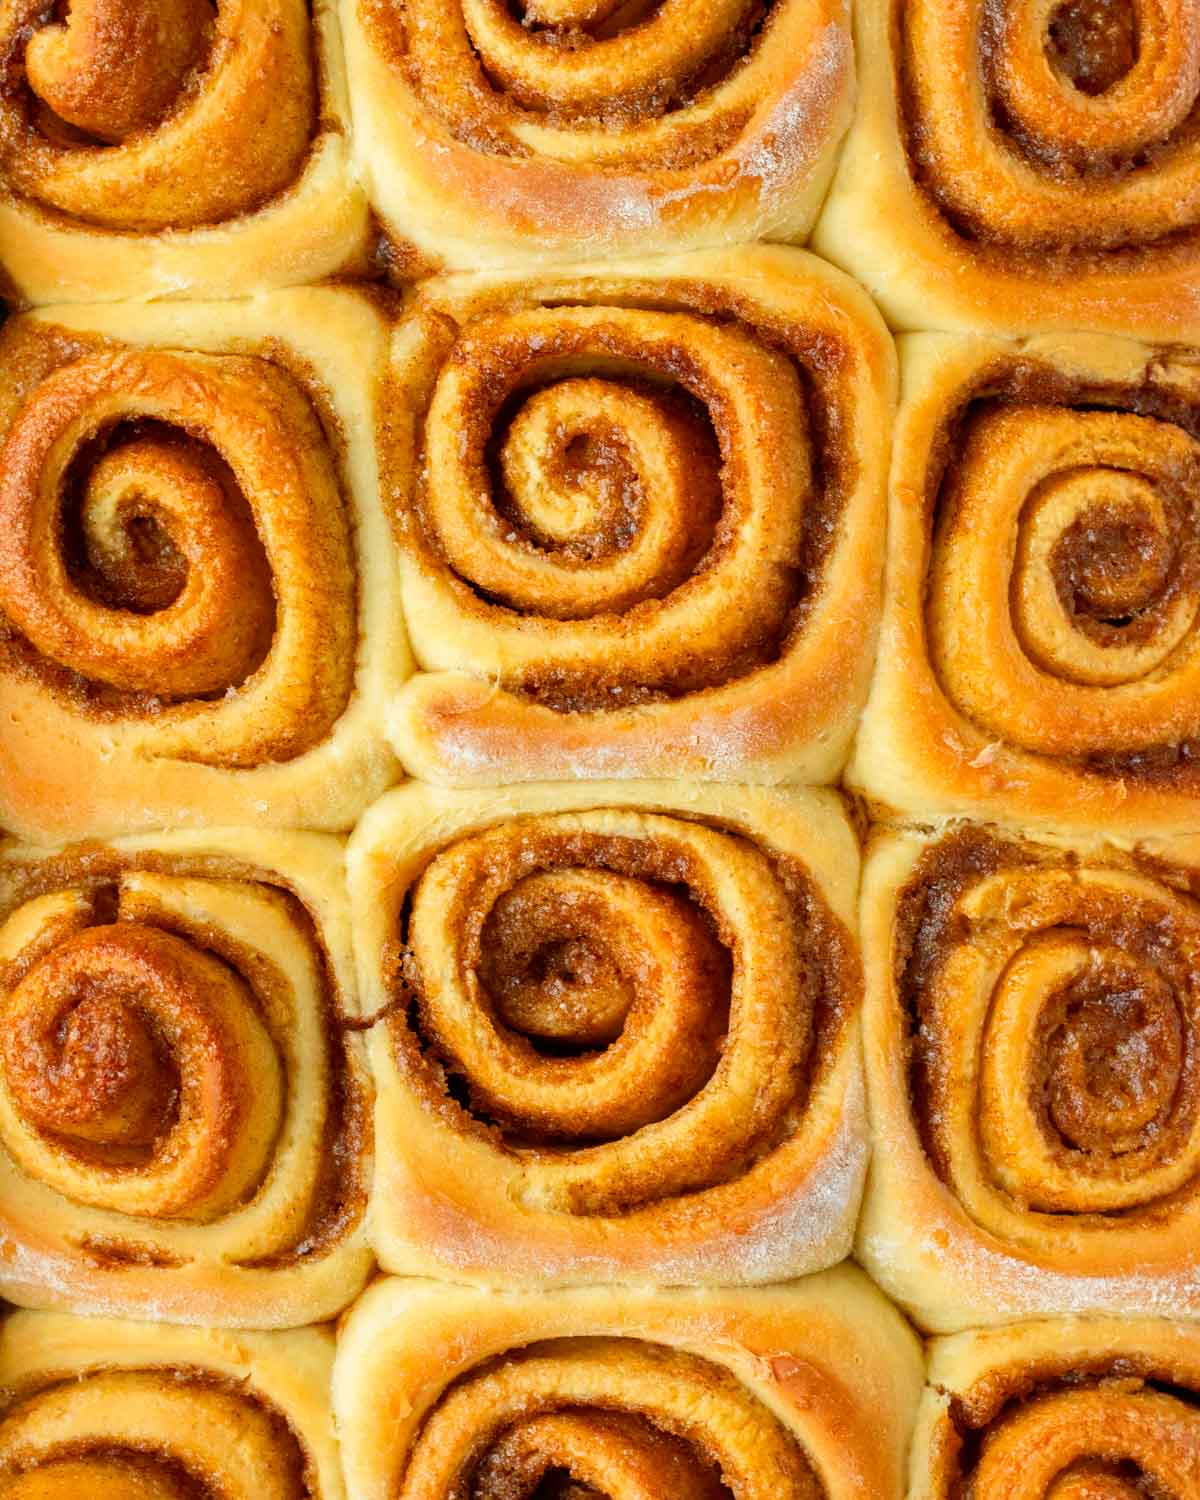 These cinnamon rolls with cream cheese frosting are the best classic soft, fluffy cinnamon rolls with a gooey cinnamon sugar filling and topped with a deliciously creamy cream cheese frosting.